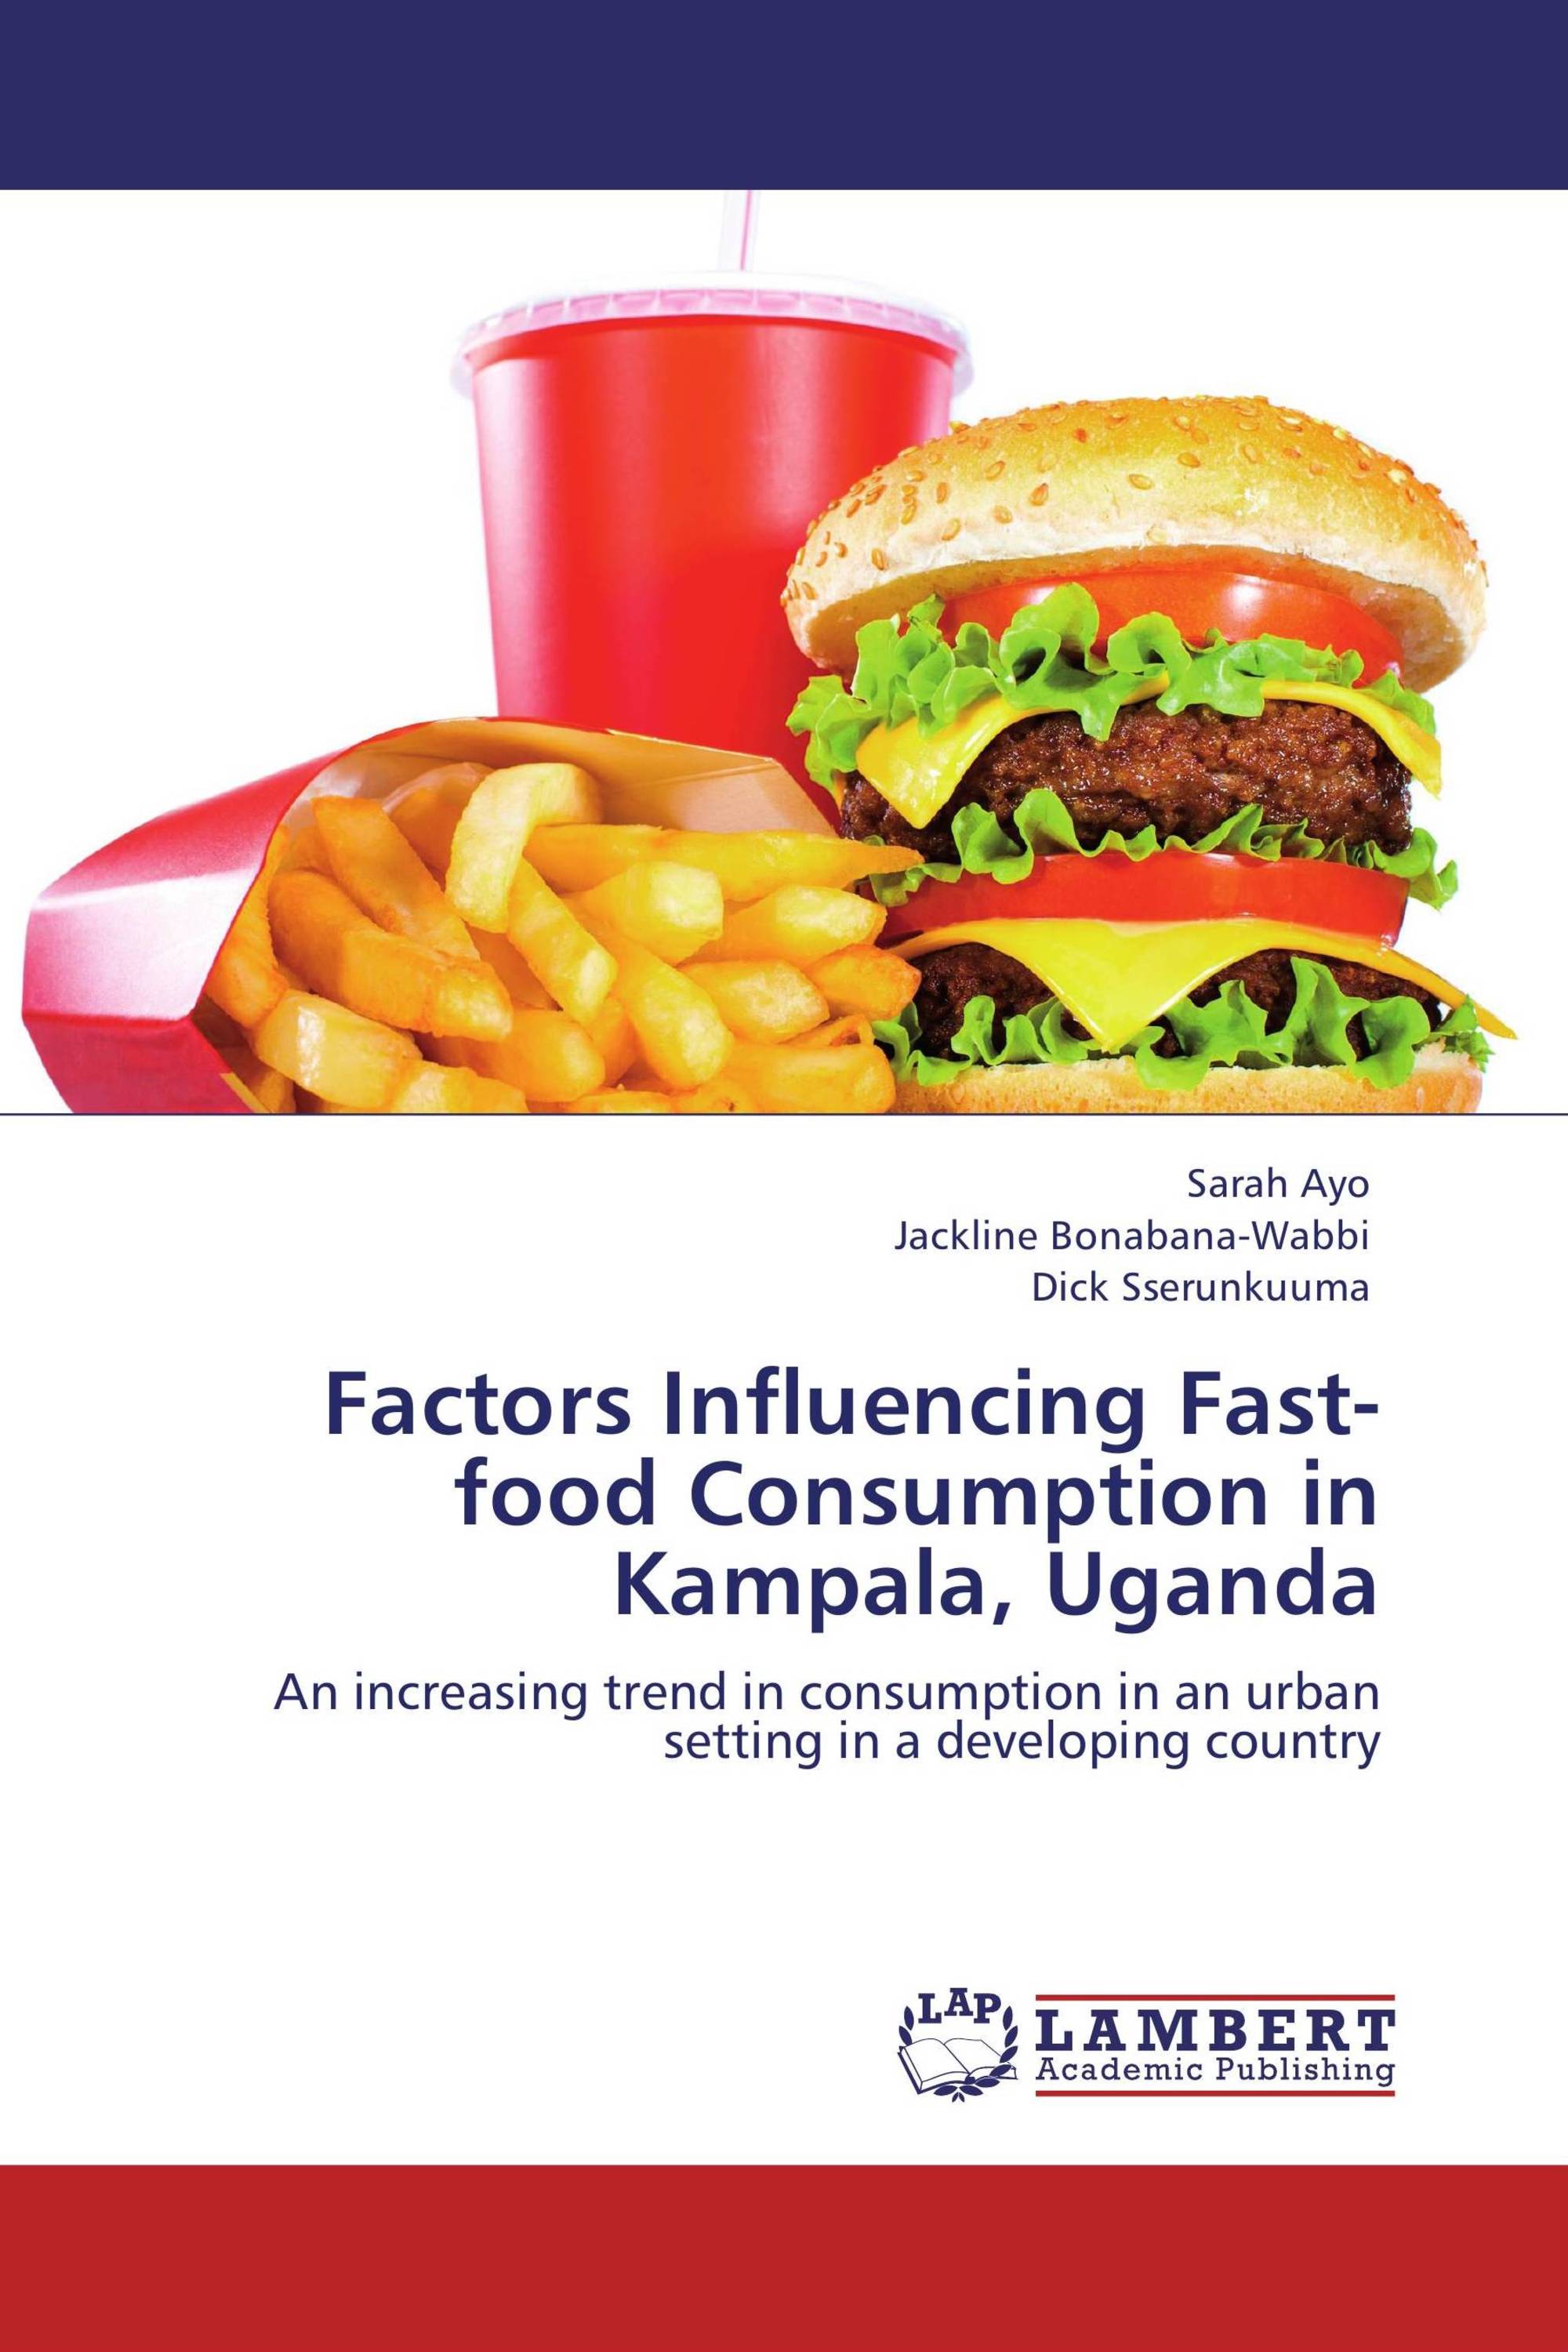 literature review on fast food consumption